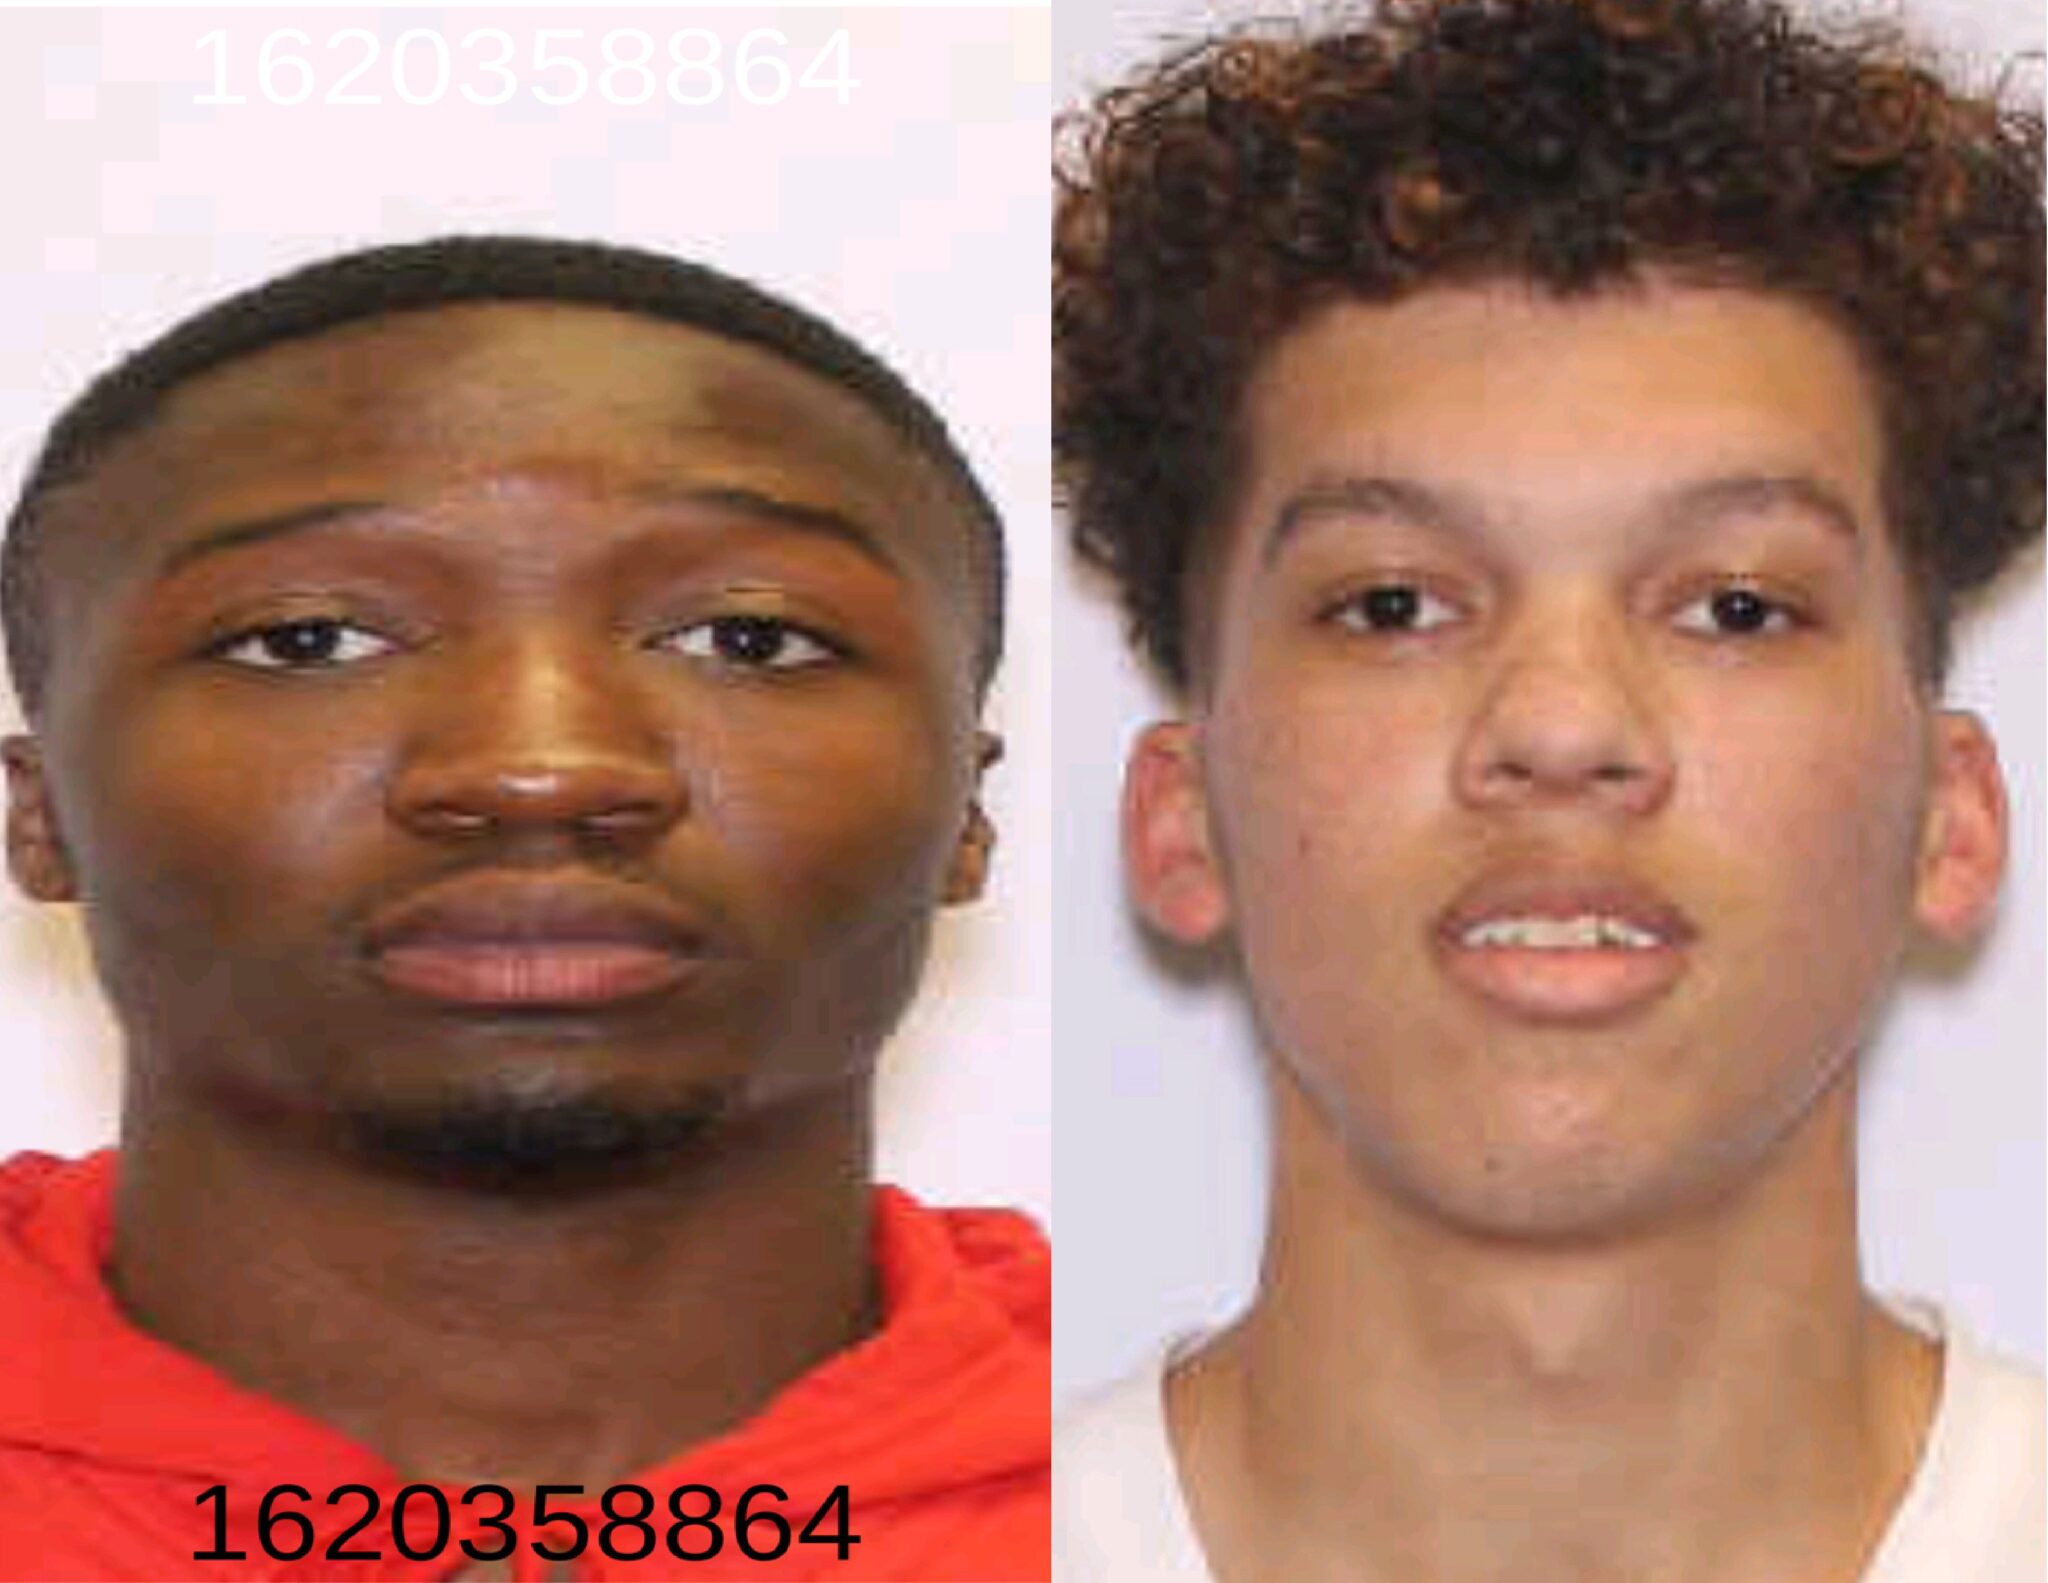 Pictured L to R: Drake Edward Campbell, age 18, and Jacob Malachi Mouzon, age 17. (Still Wanted By Authorities)